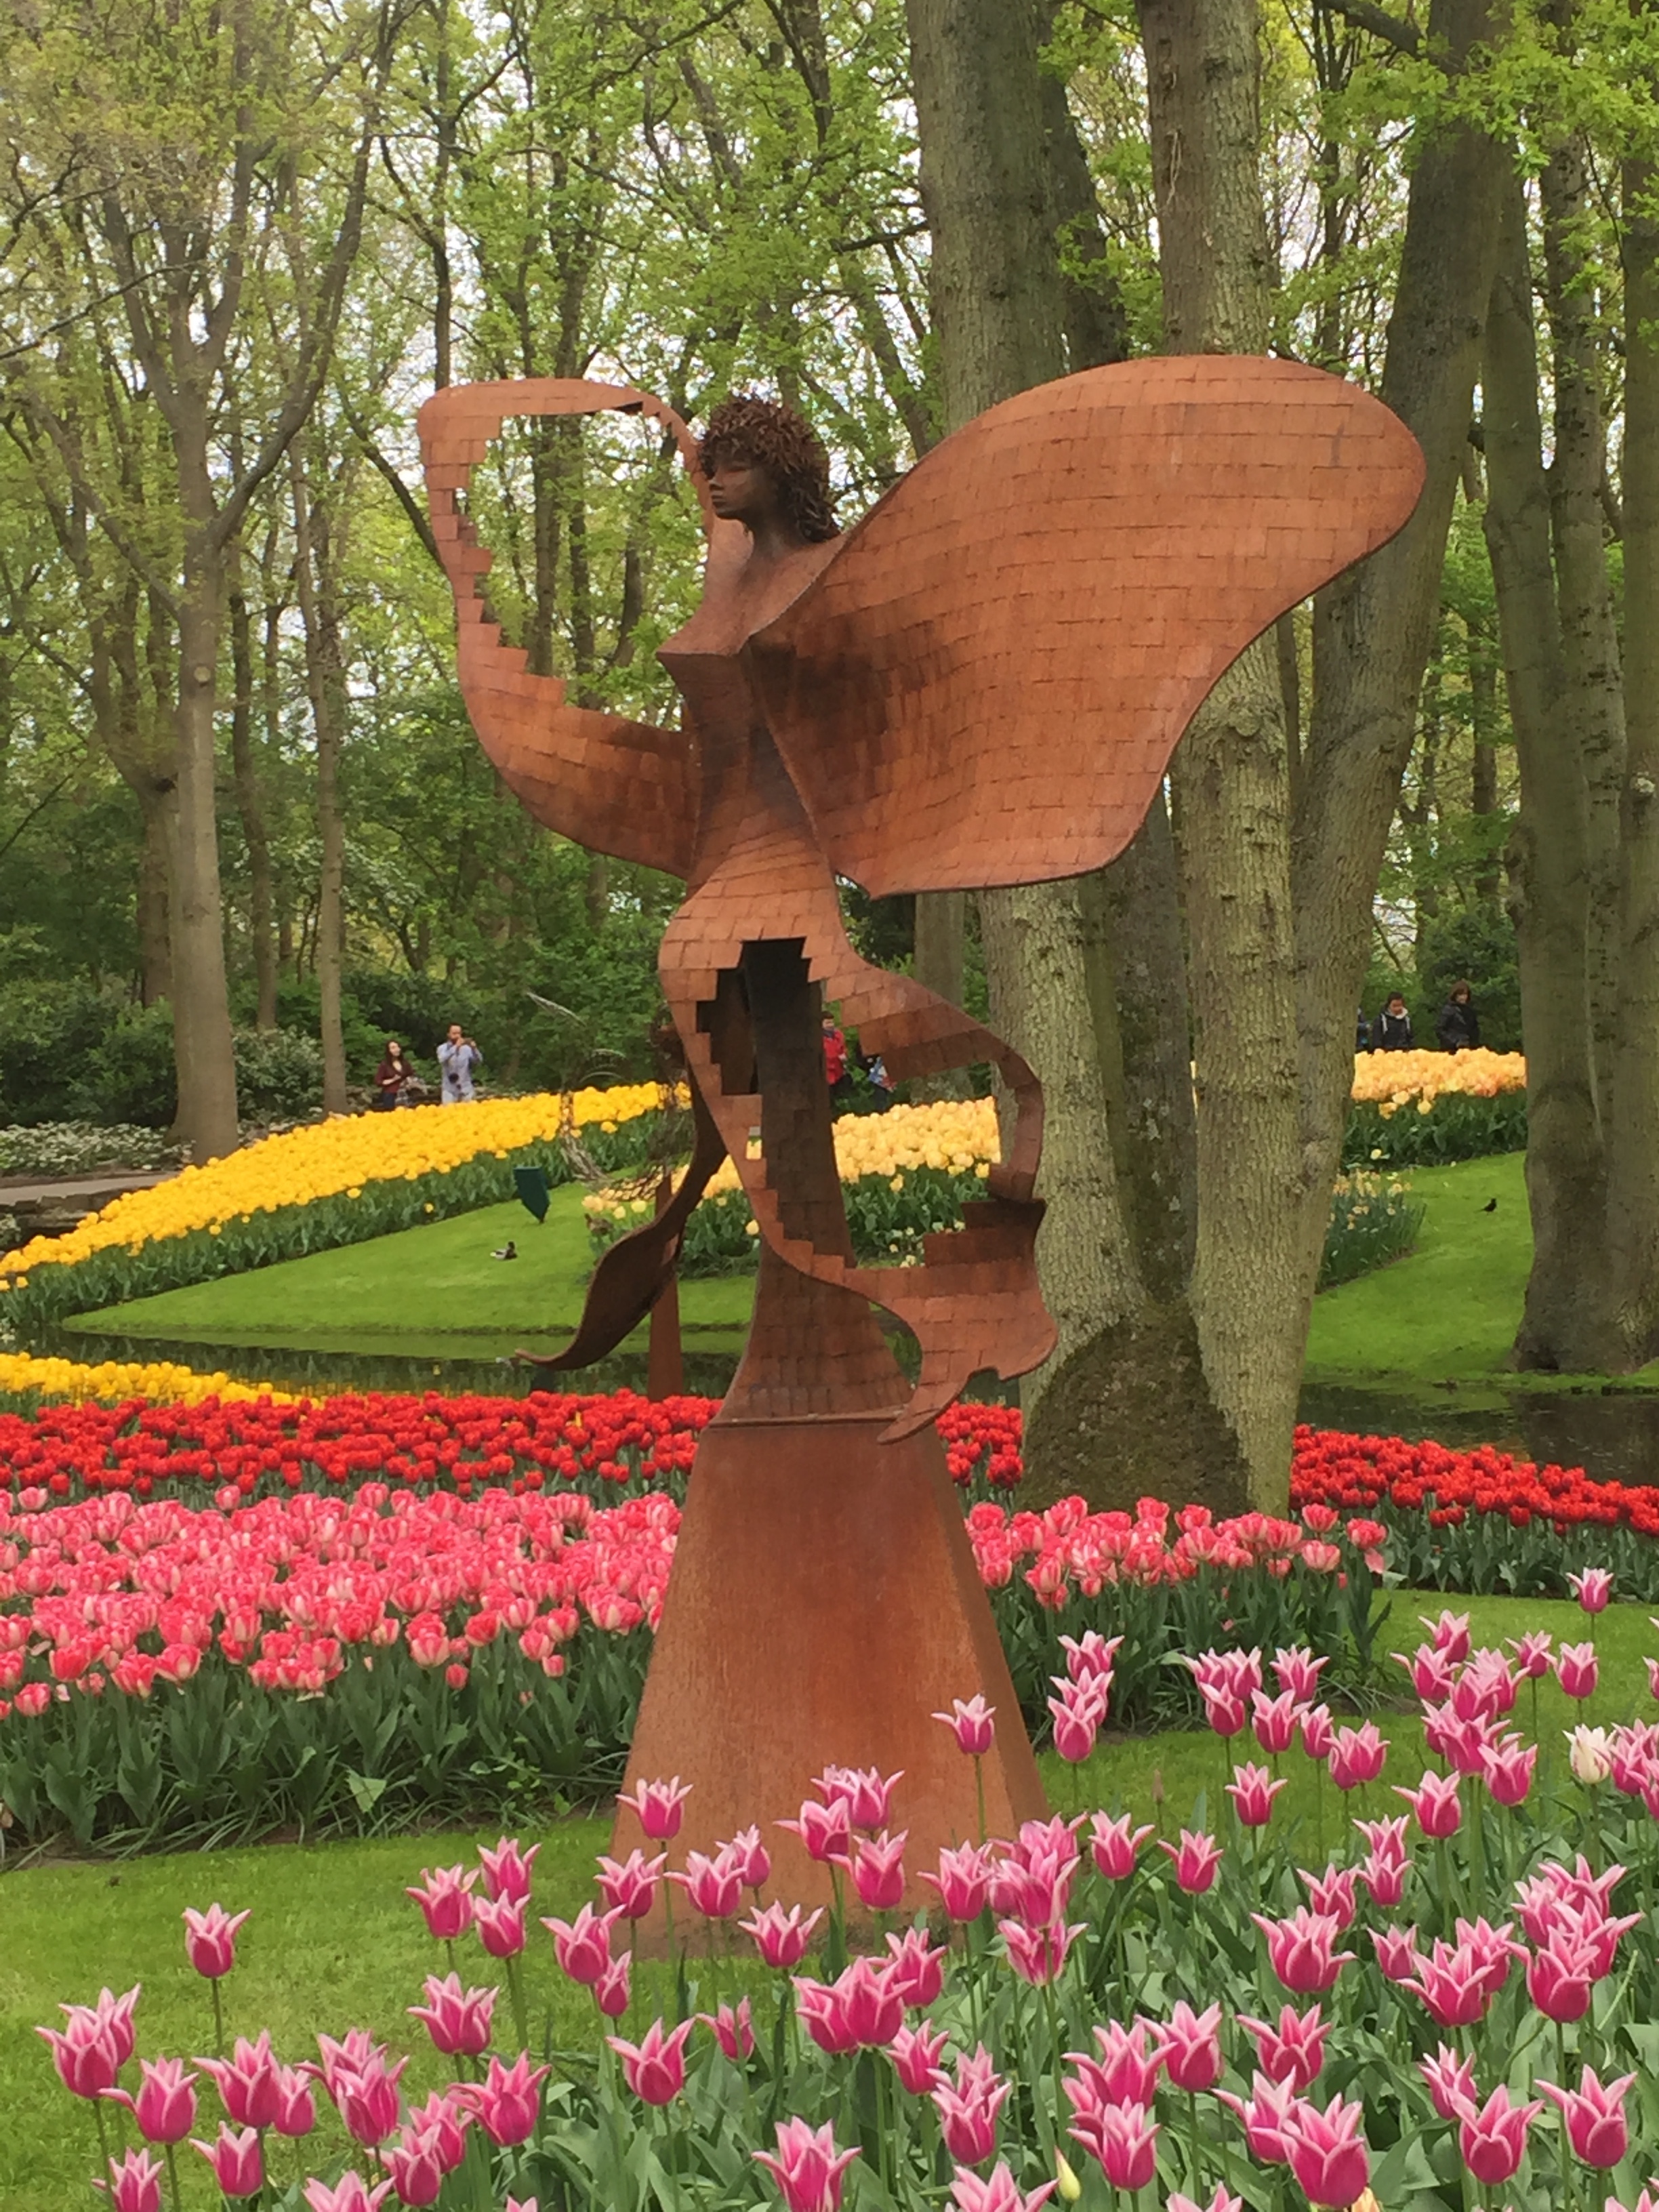 A bronze statue of a butterfly amidst beds of bright tulips.